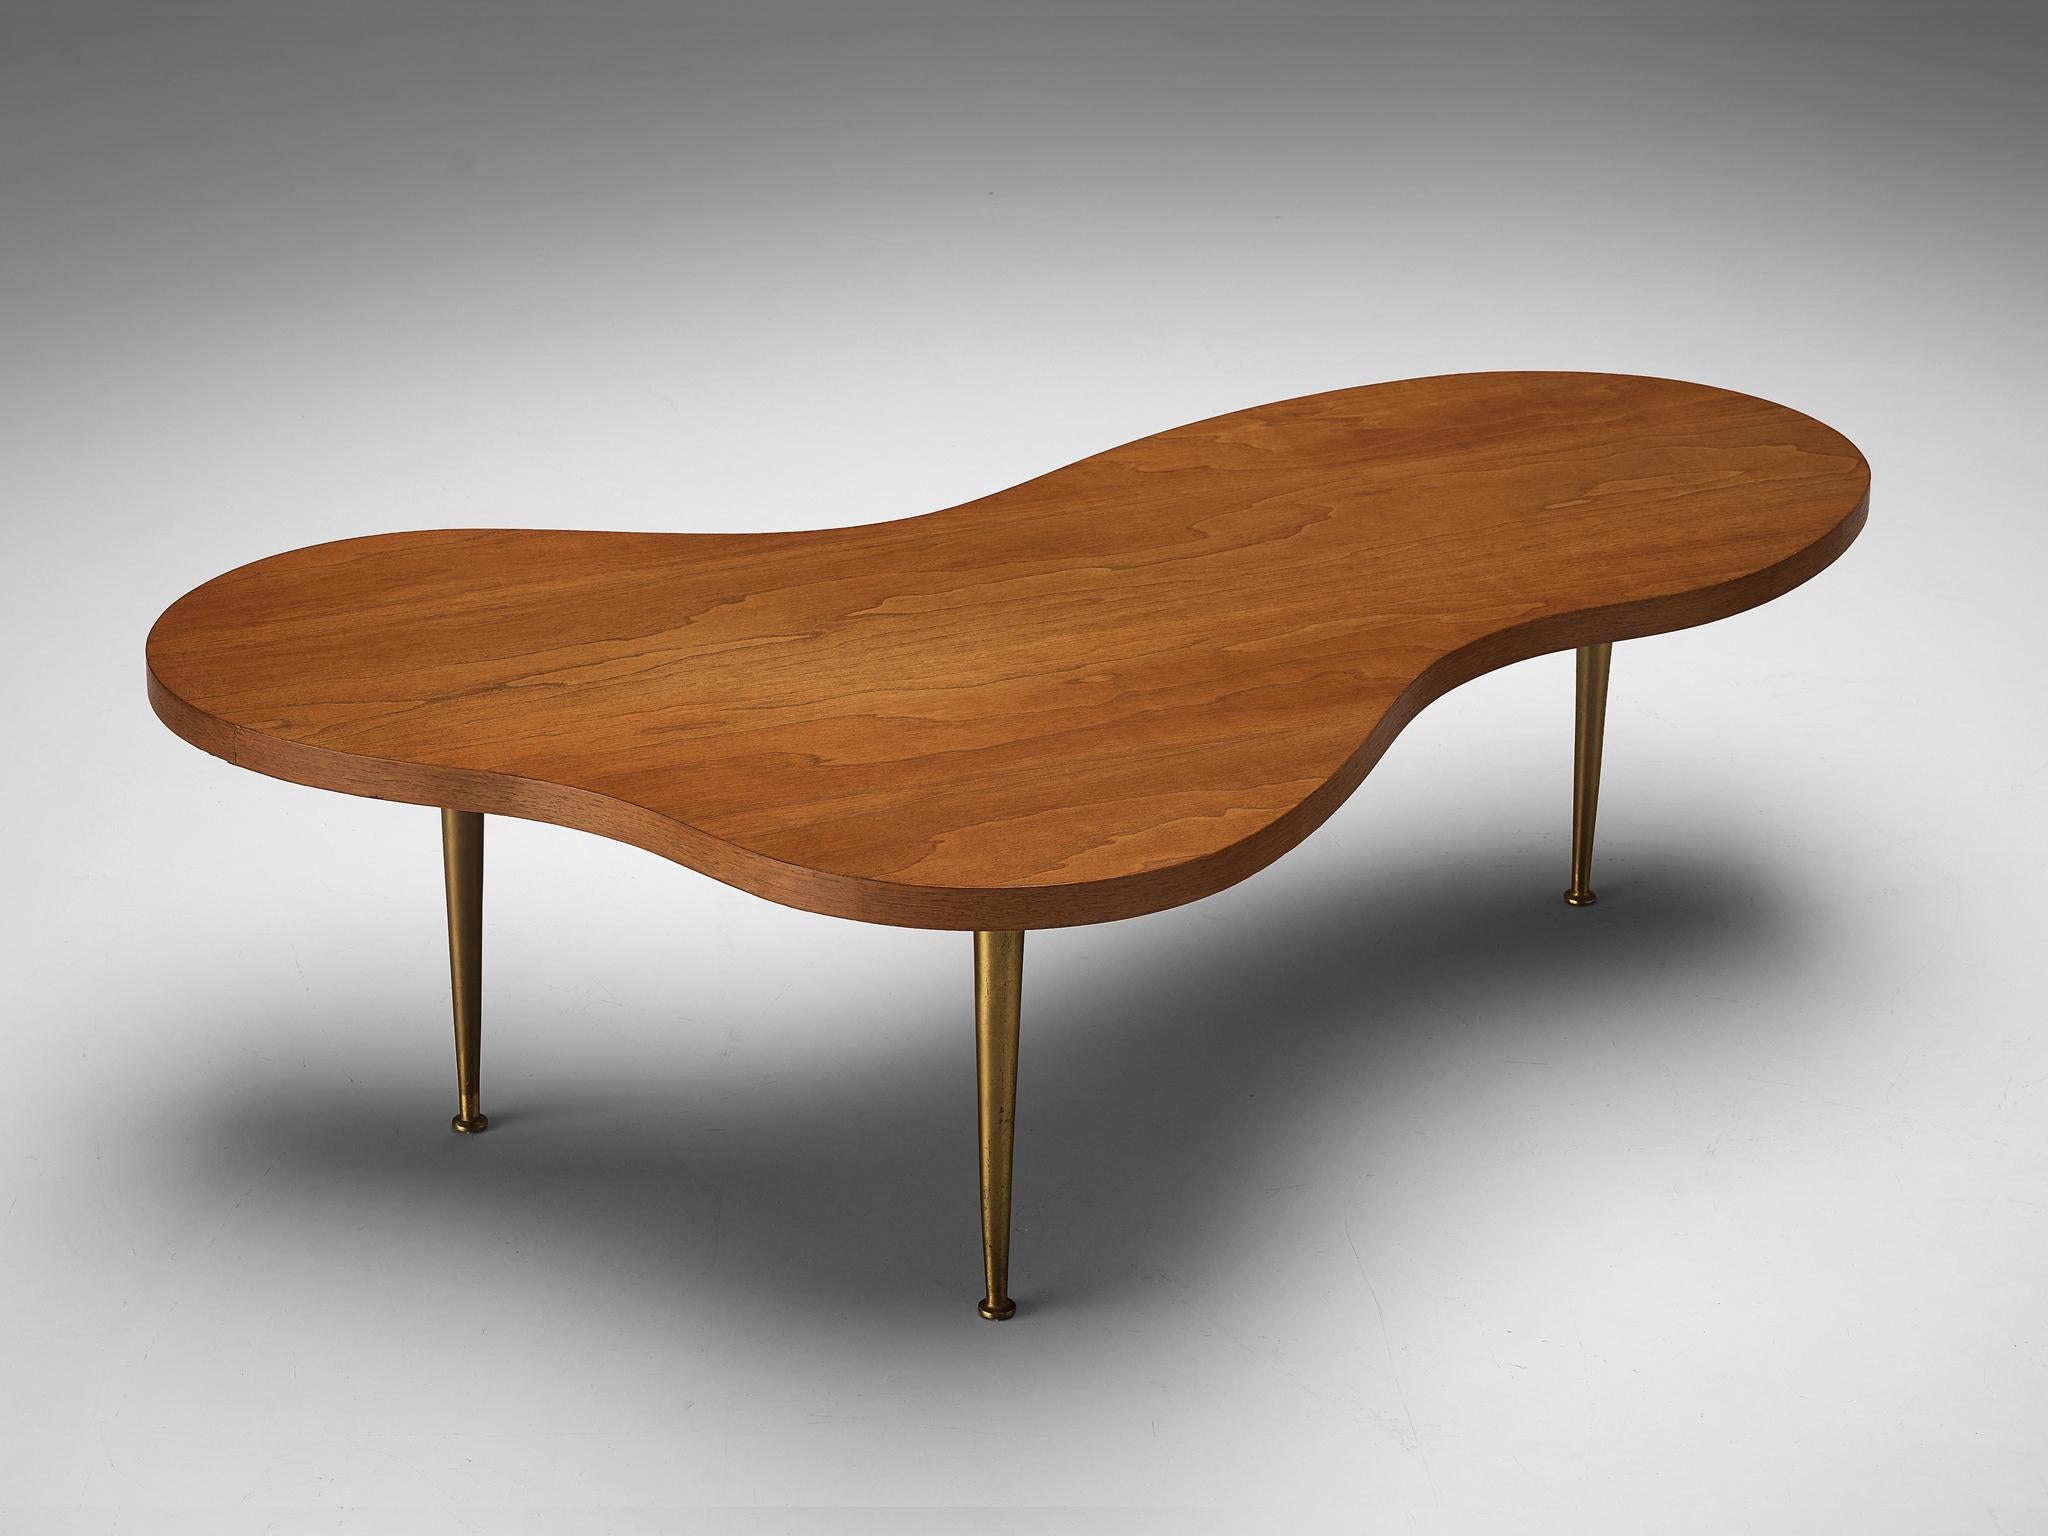 T.H. Robsjohn-Gibbings for Widdicomb, coffee table 1759, cherry, brass, United States, 1960s

This freeform coffee table by T.H. Robsjohn-Gibbings for Widdicomb is made out of warm coloured cherrywood. The biomorphic tabletop rests on four brass